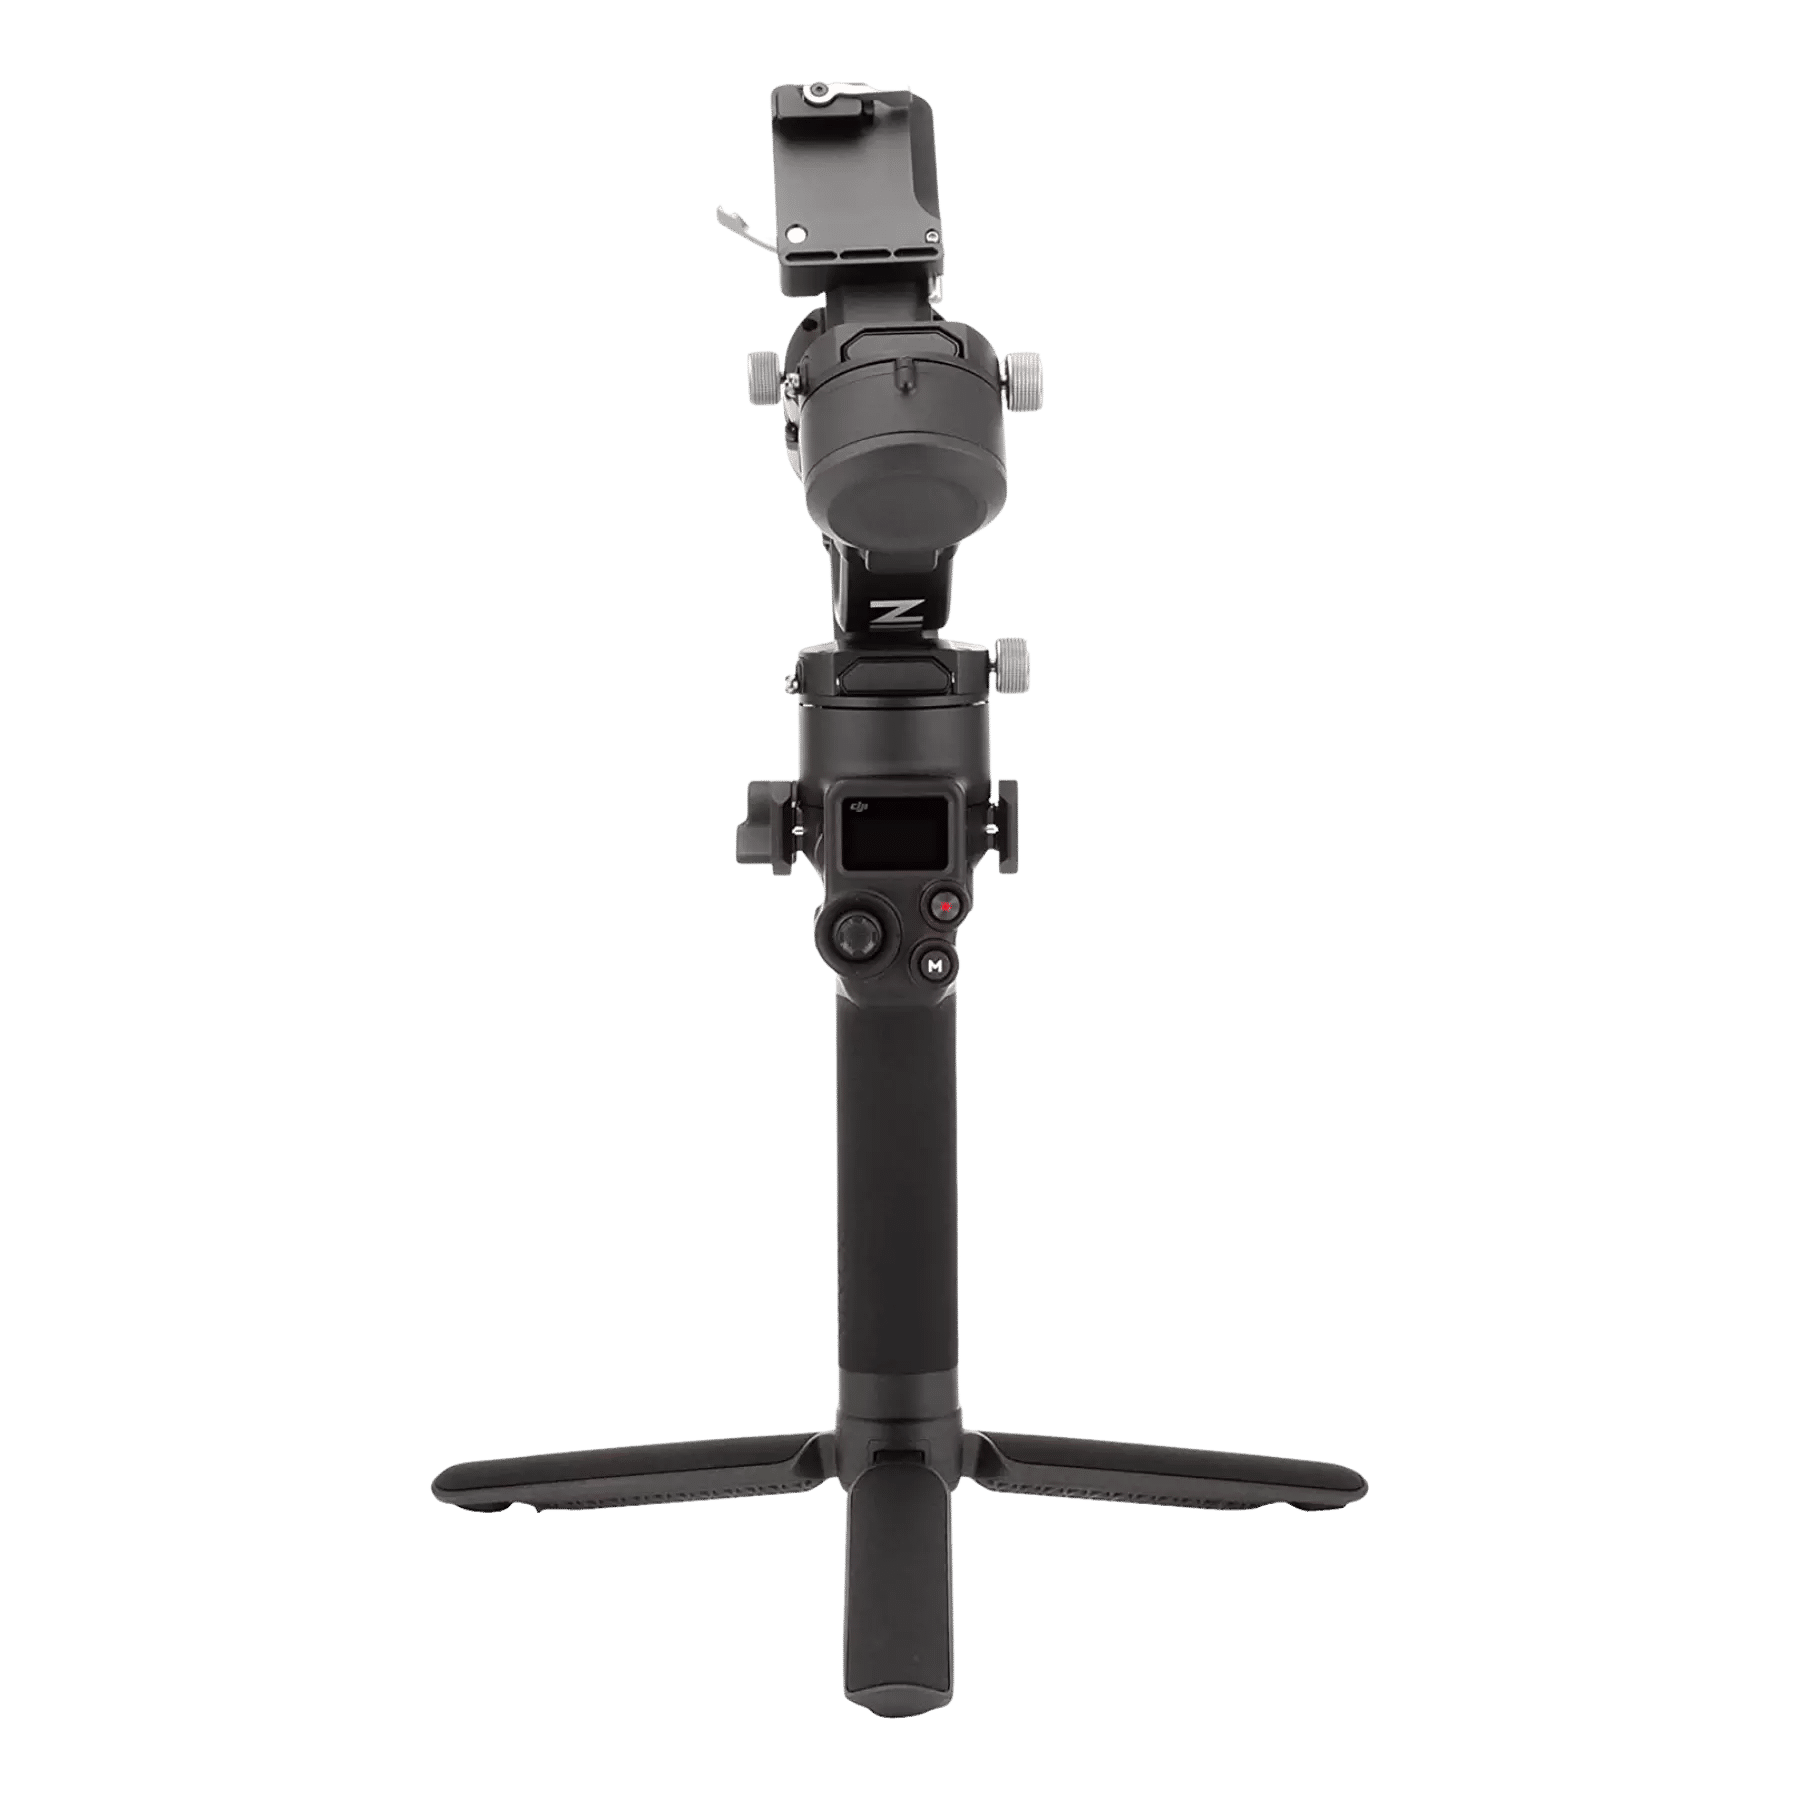 These are product images of DJI RSC2 Gimbal on rent by SharePal in Bangalore.